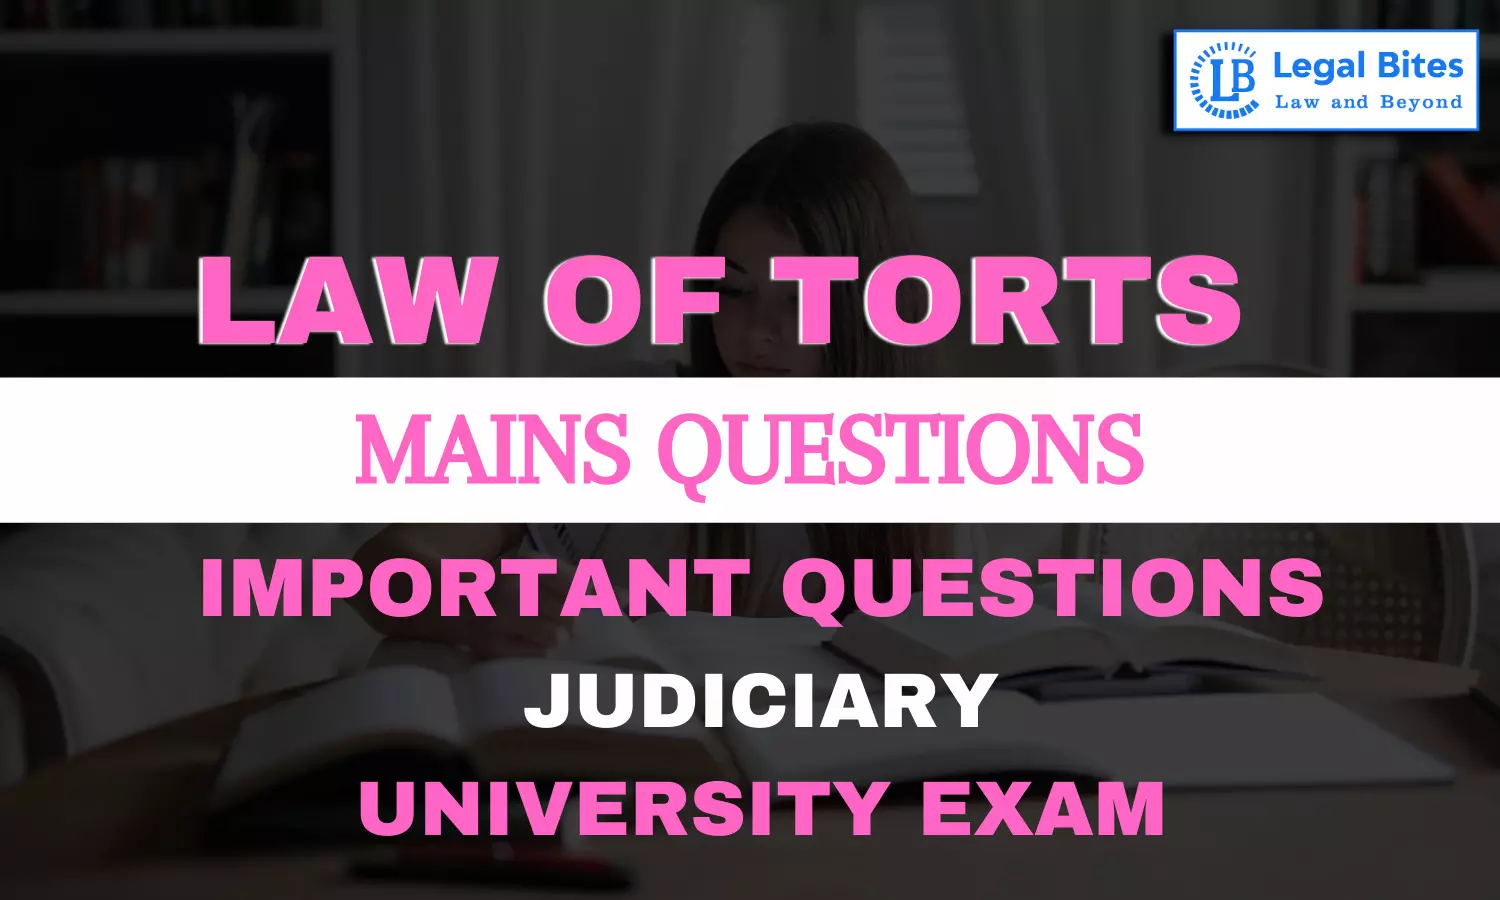 There is a distinction between Tort and Crime, but there are various wrongs which find place both under Criminal Law and Law of Torts. Comment.